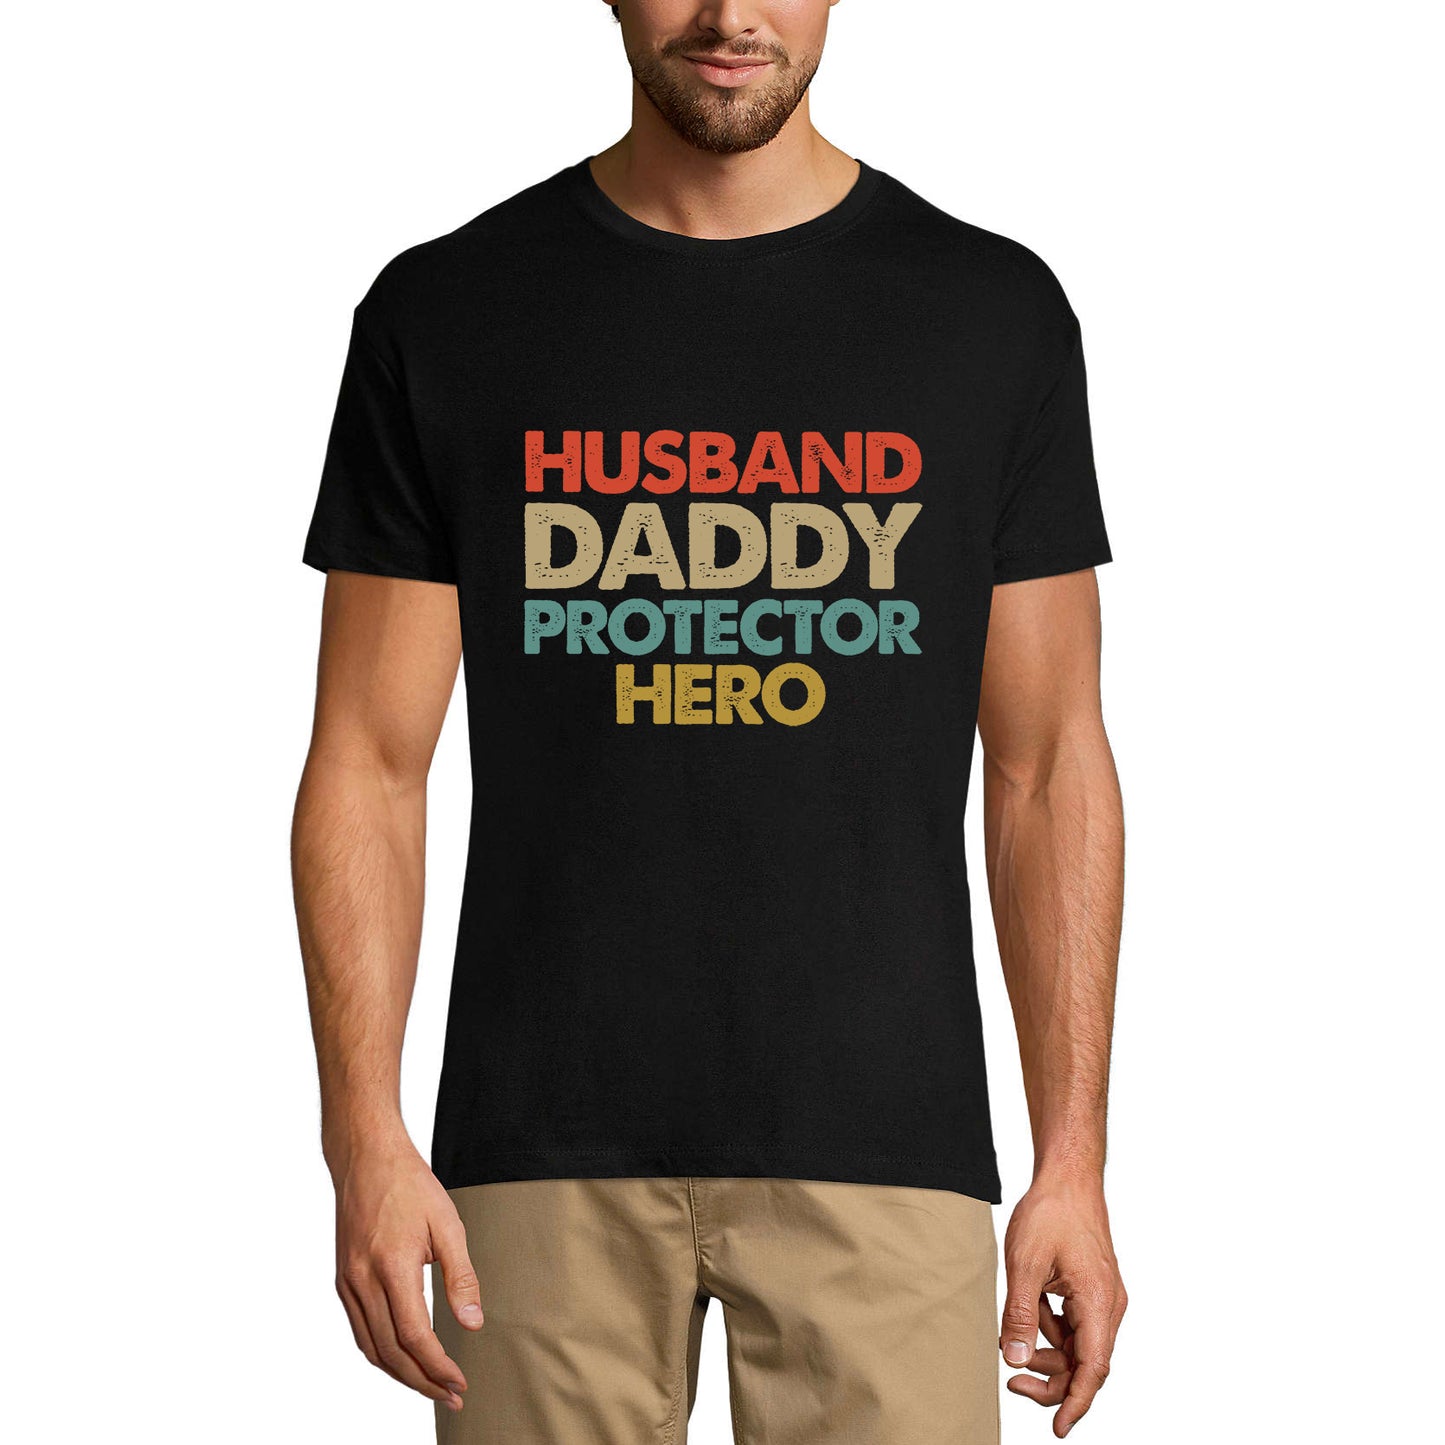 ULTRABASIC Men's Graphic T-Shirt Husband Daddy Protector - Father's Day